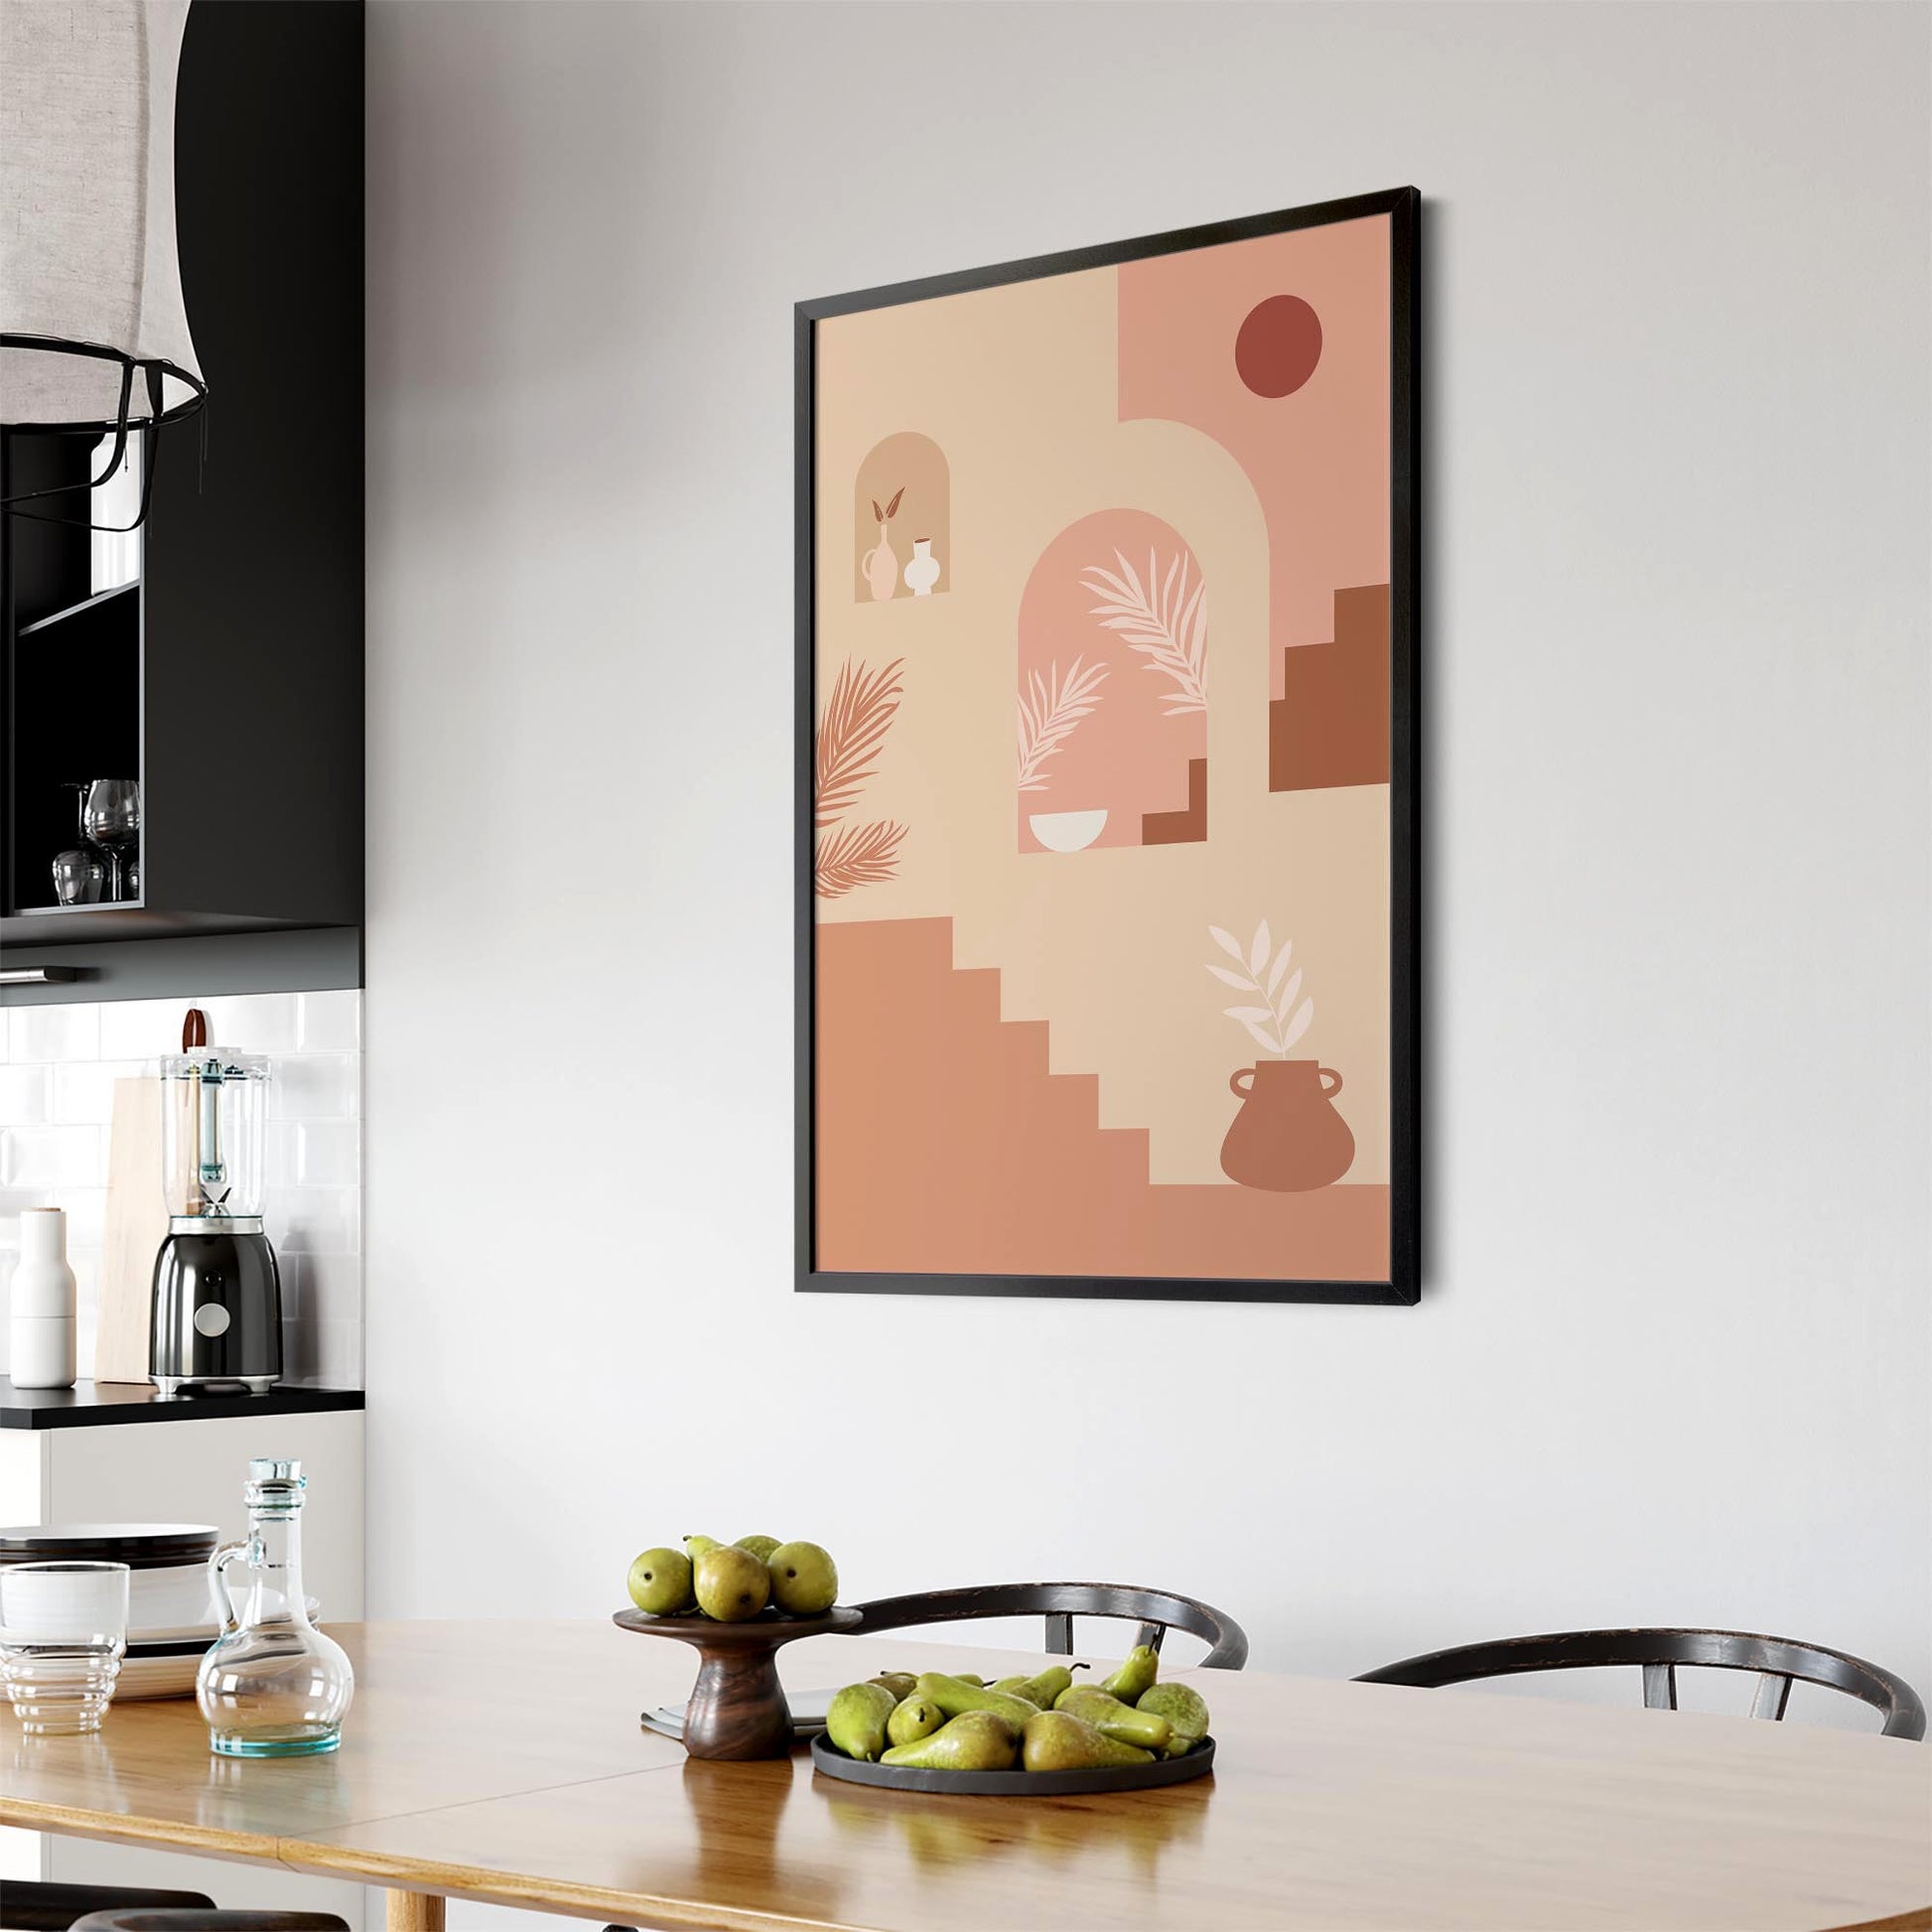 Abstract Terracotta Minimal Home Decor Wall Art - The Affordable Art Company